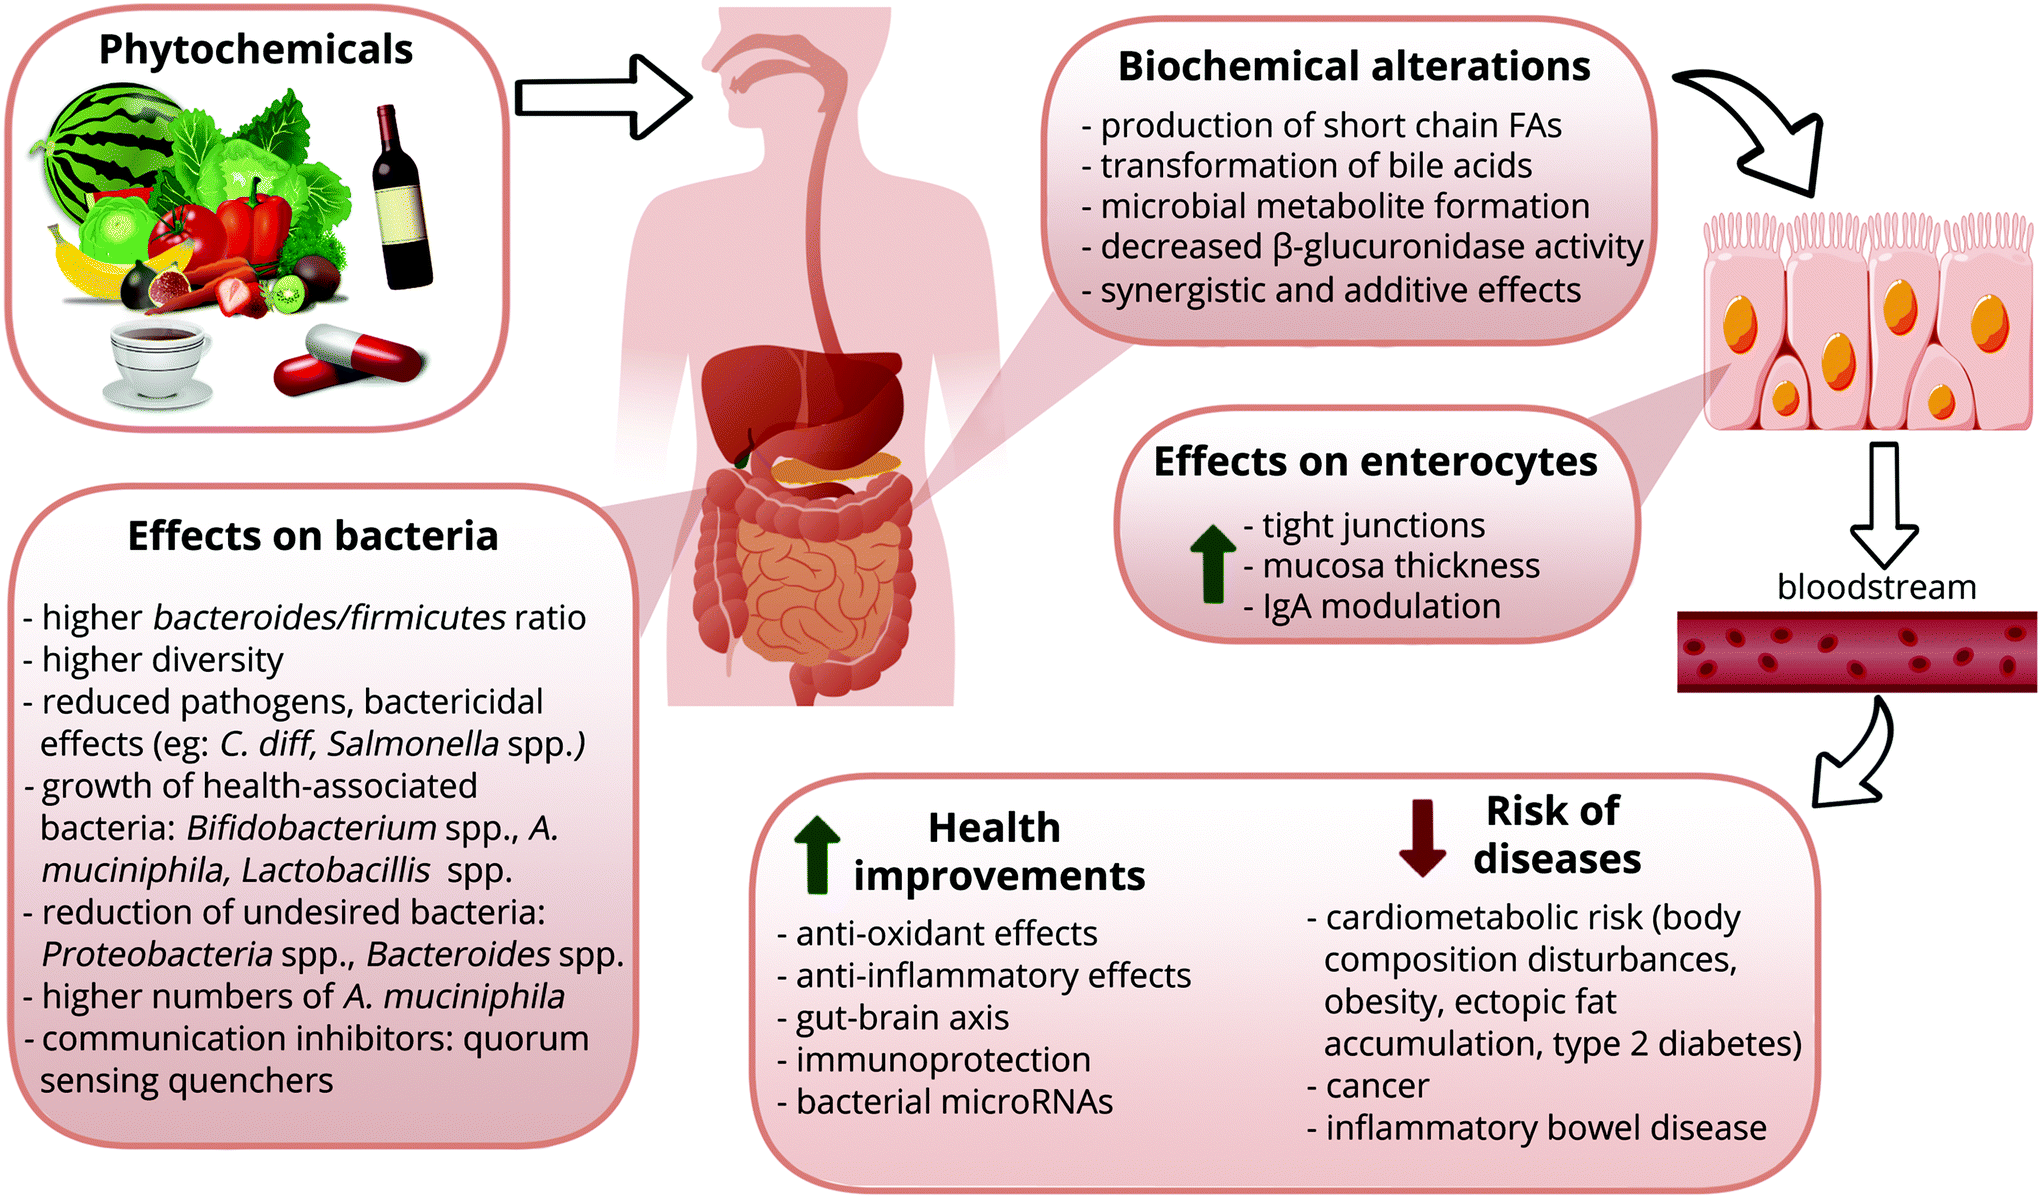 Phytochemicals as modifiers of gut microbial communities - Food 